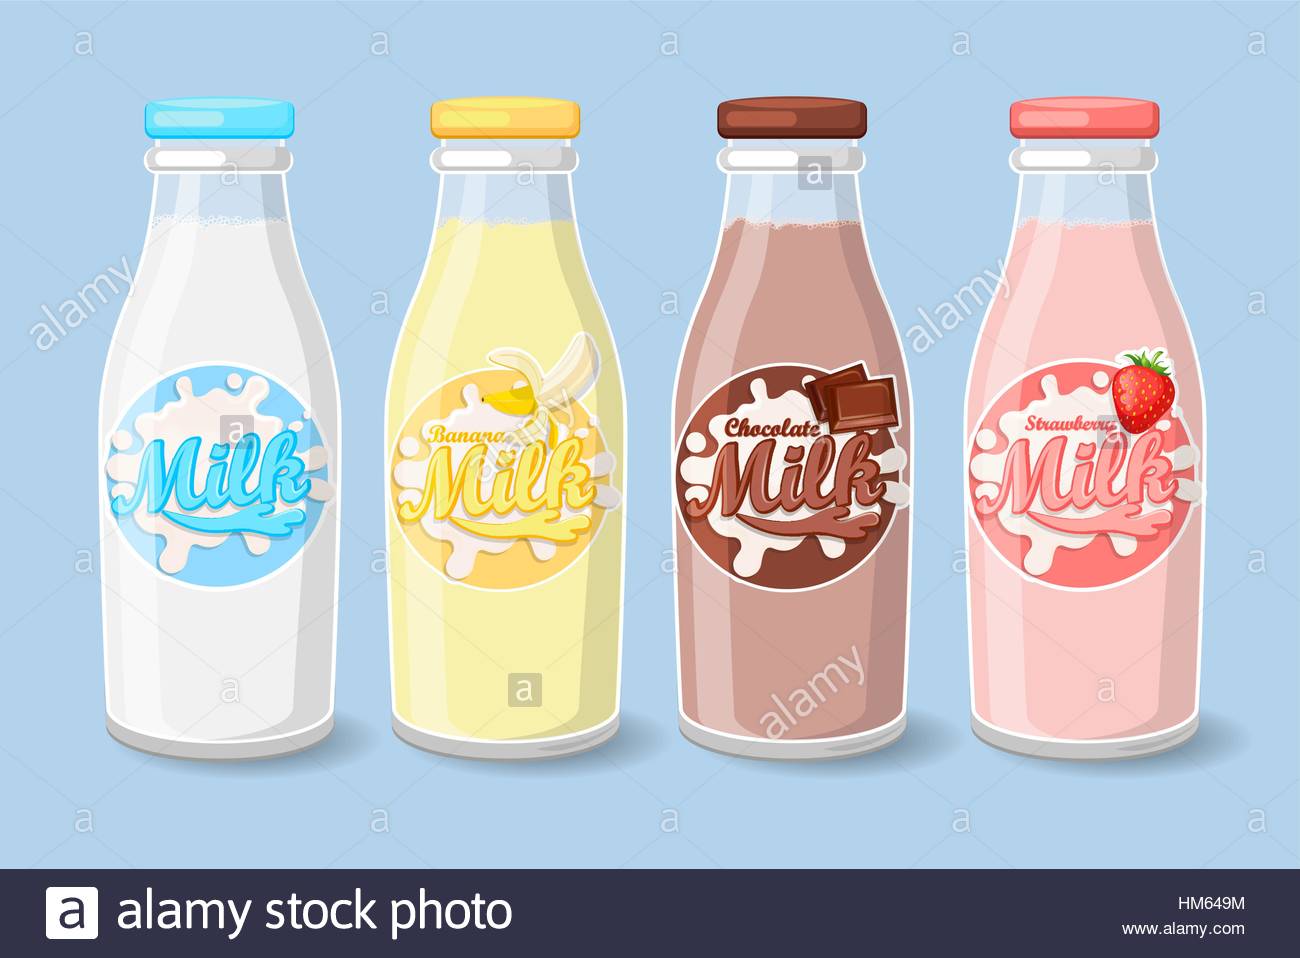 Milk choco download for pc